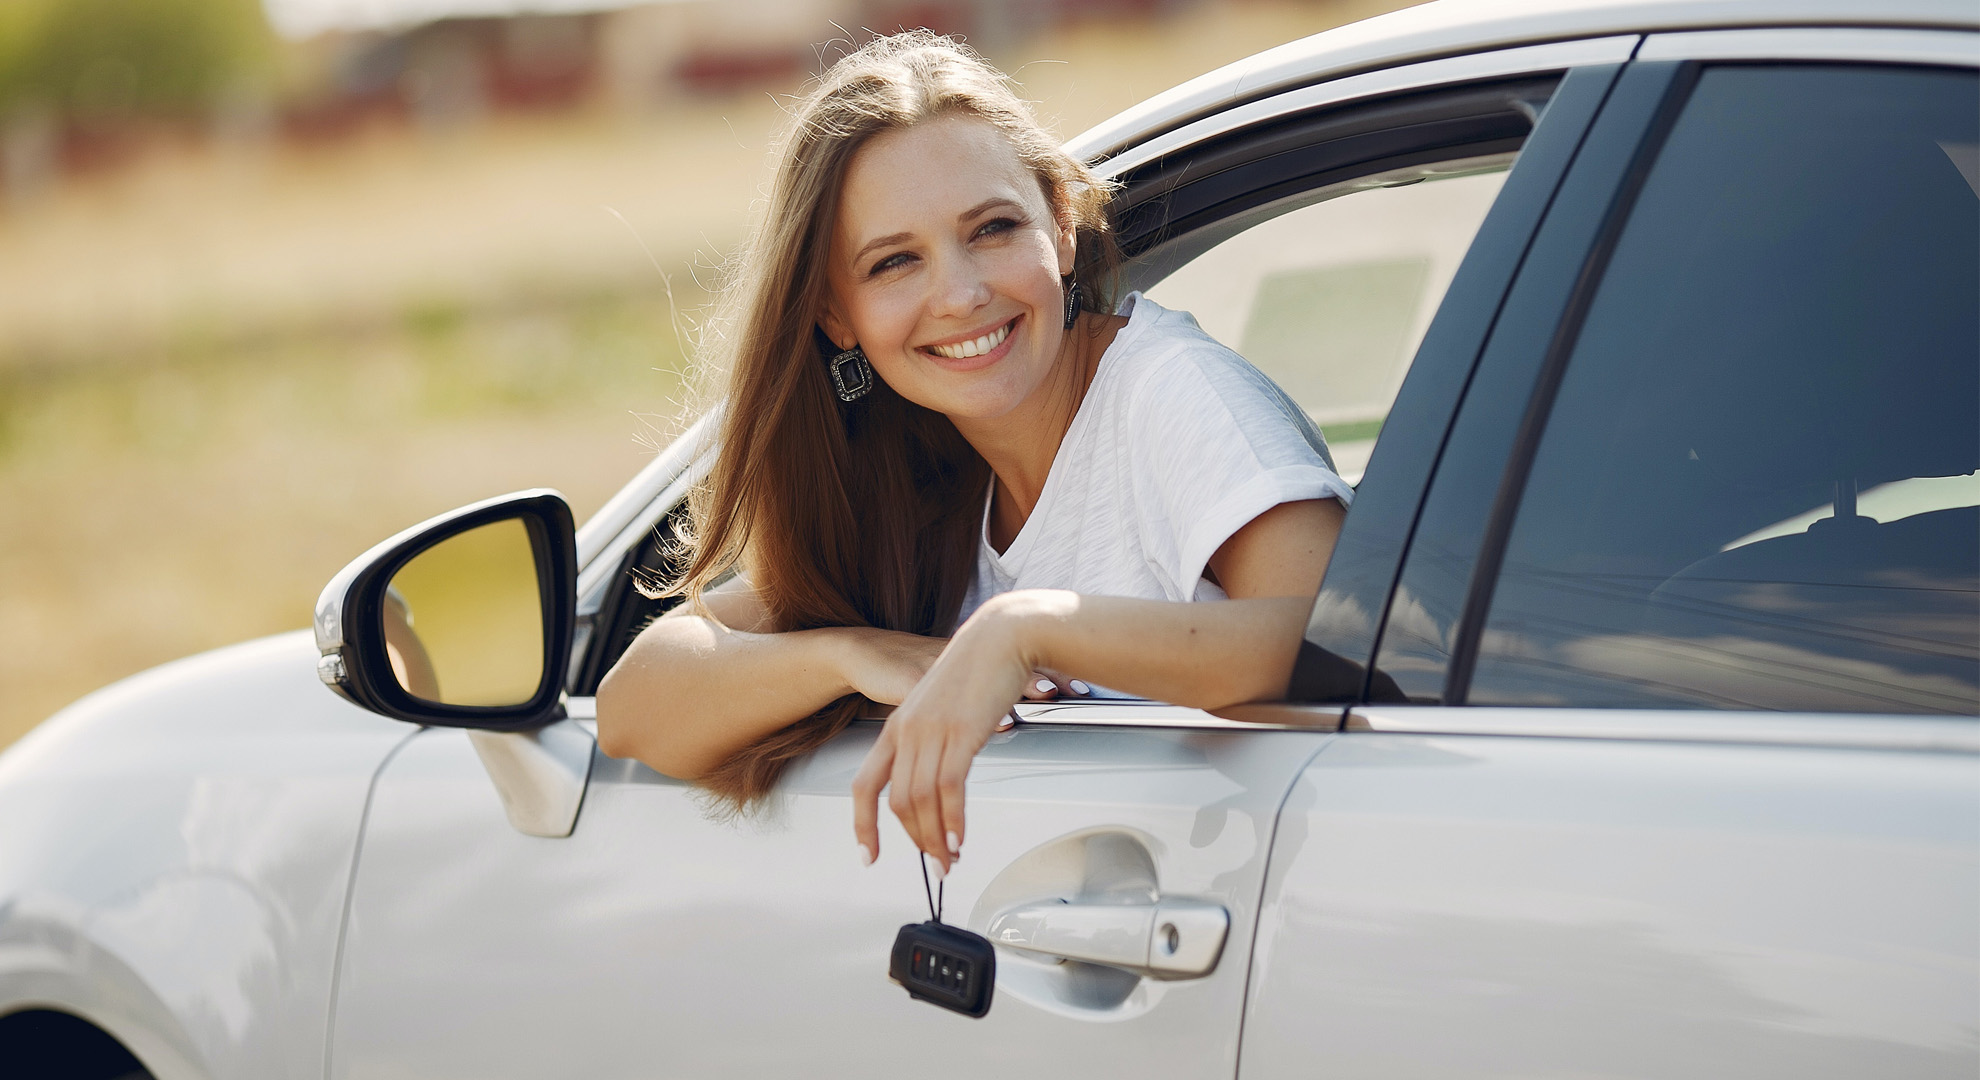 Woman hanging out of car window holding keys and smiling